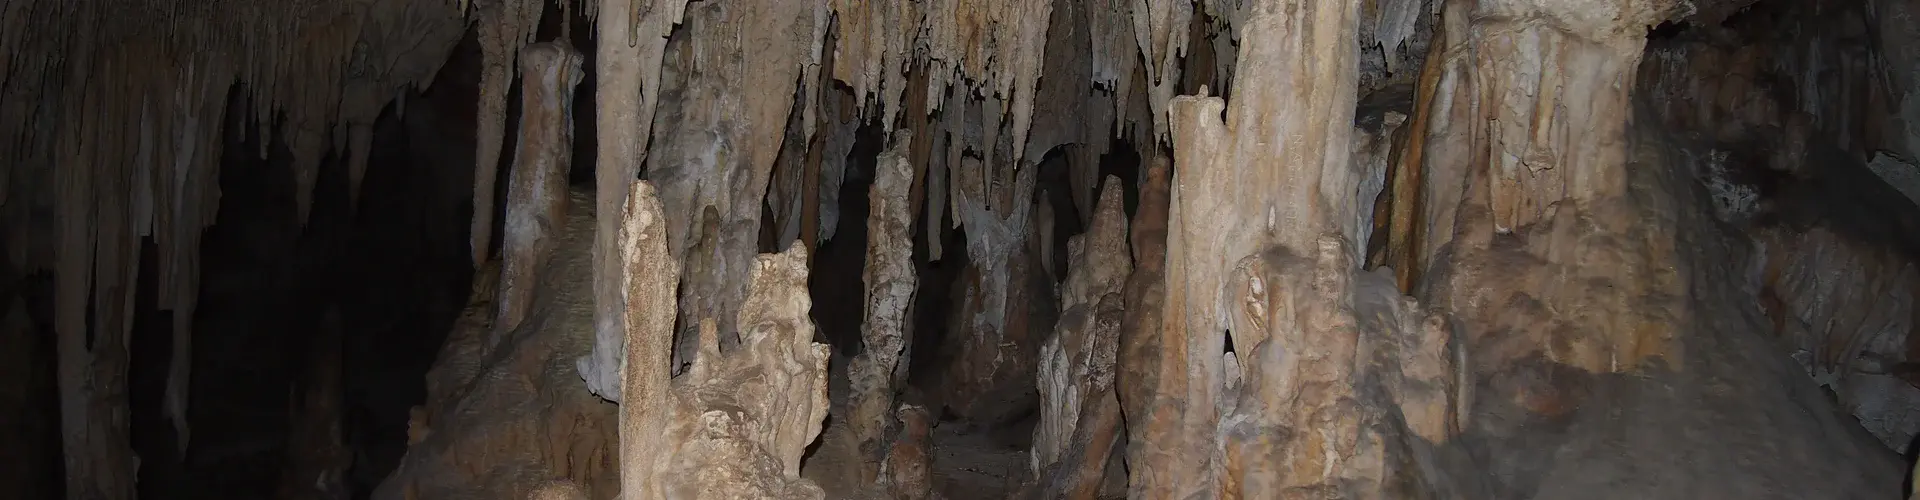 Stalactites and stalagmites in Yonderup cave (Credit: Andy Baker)